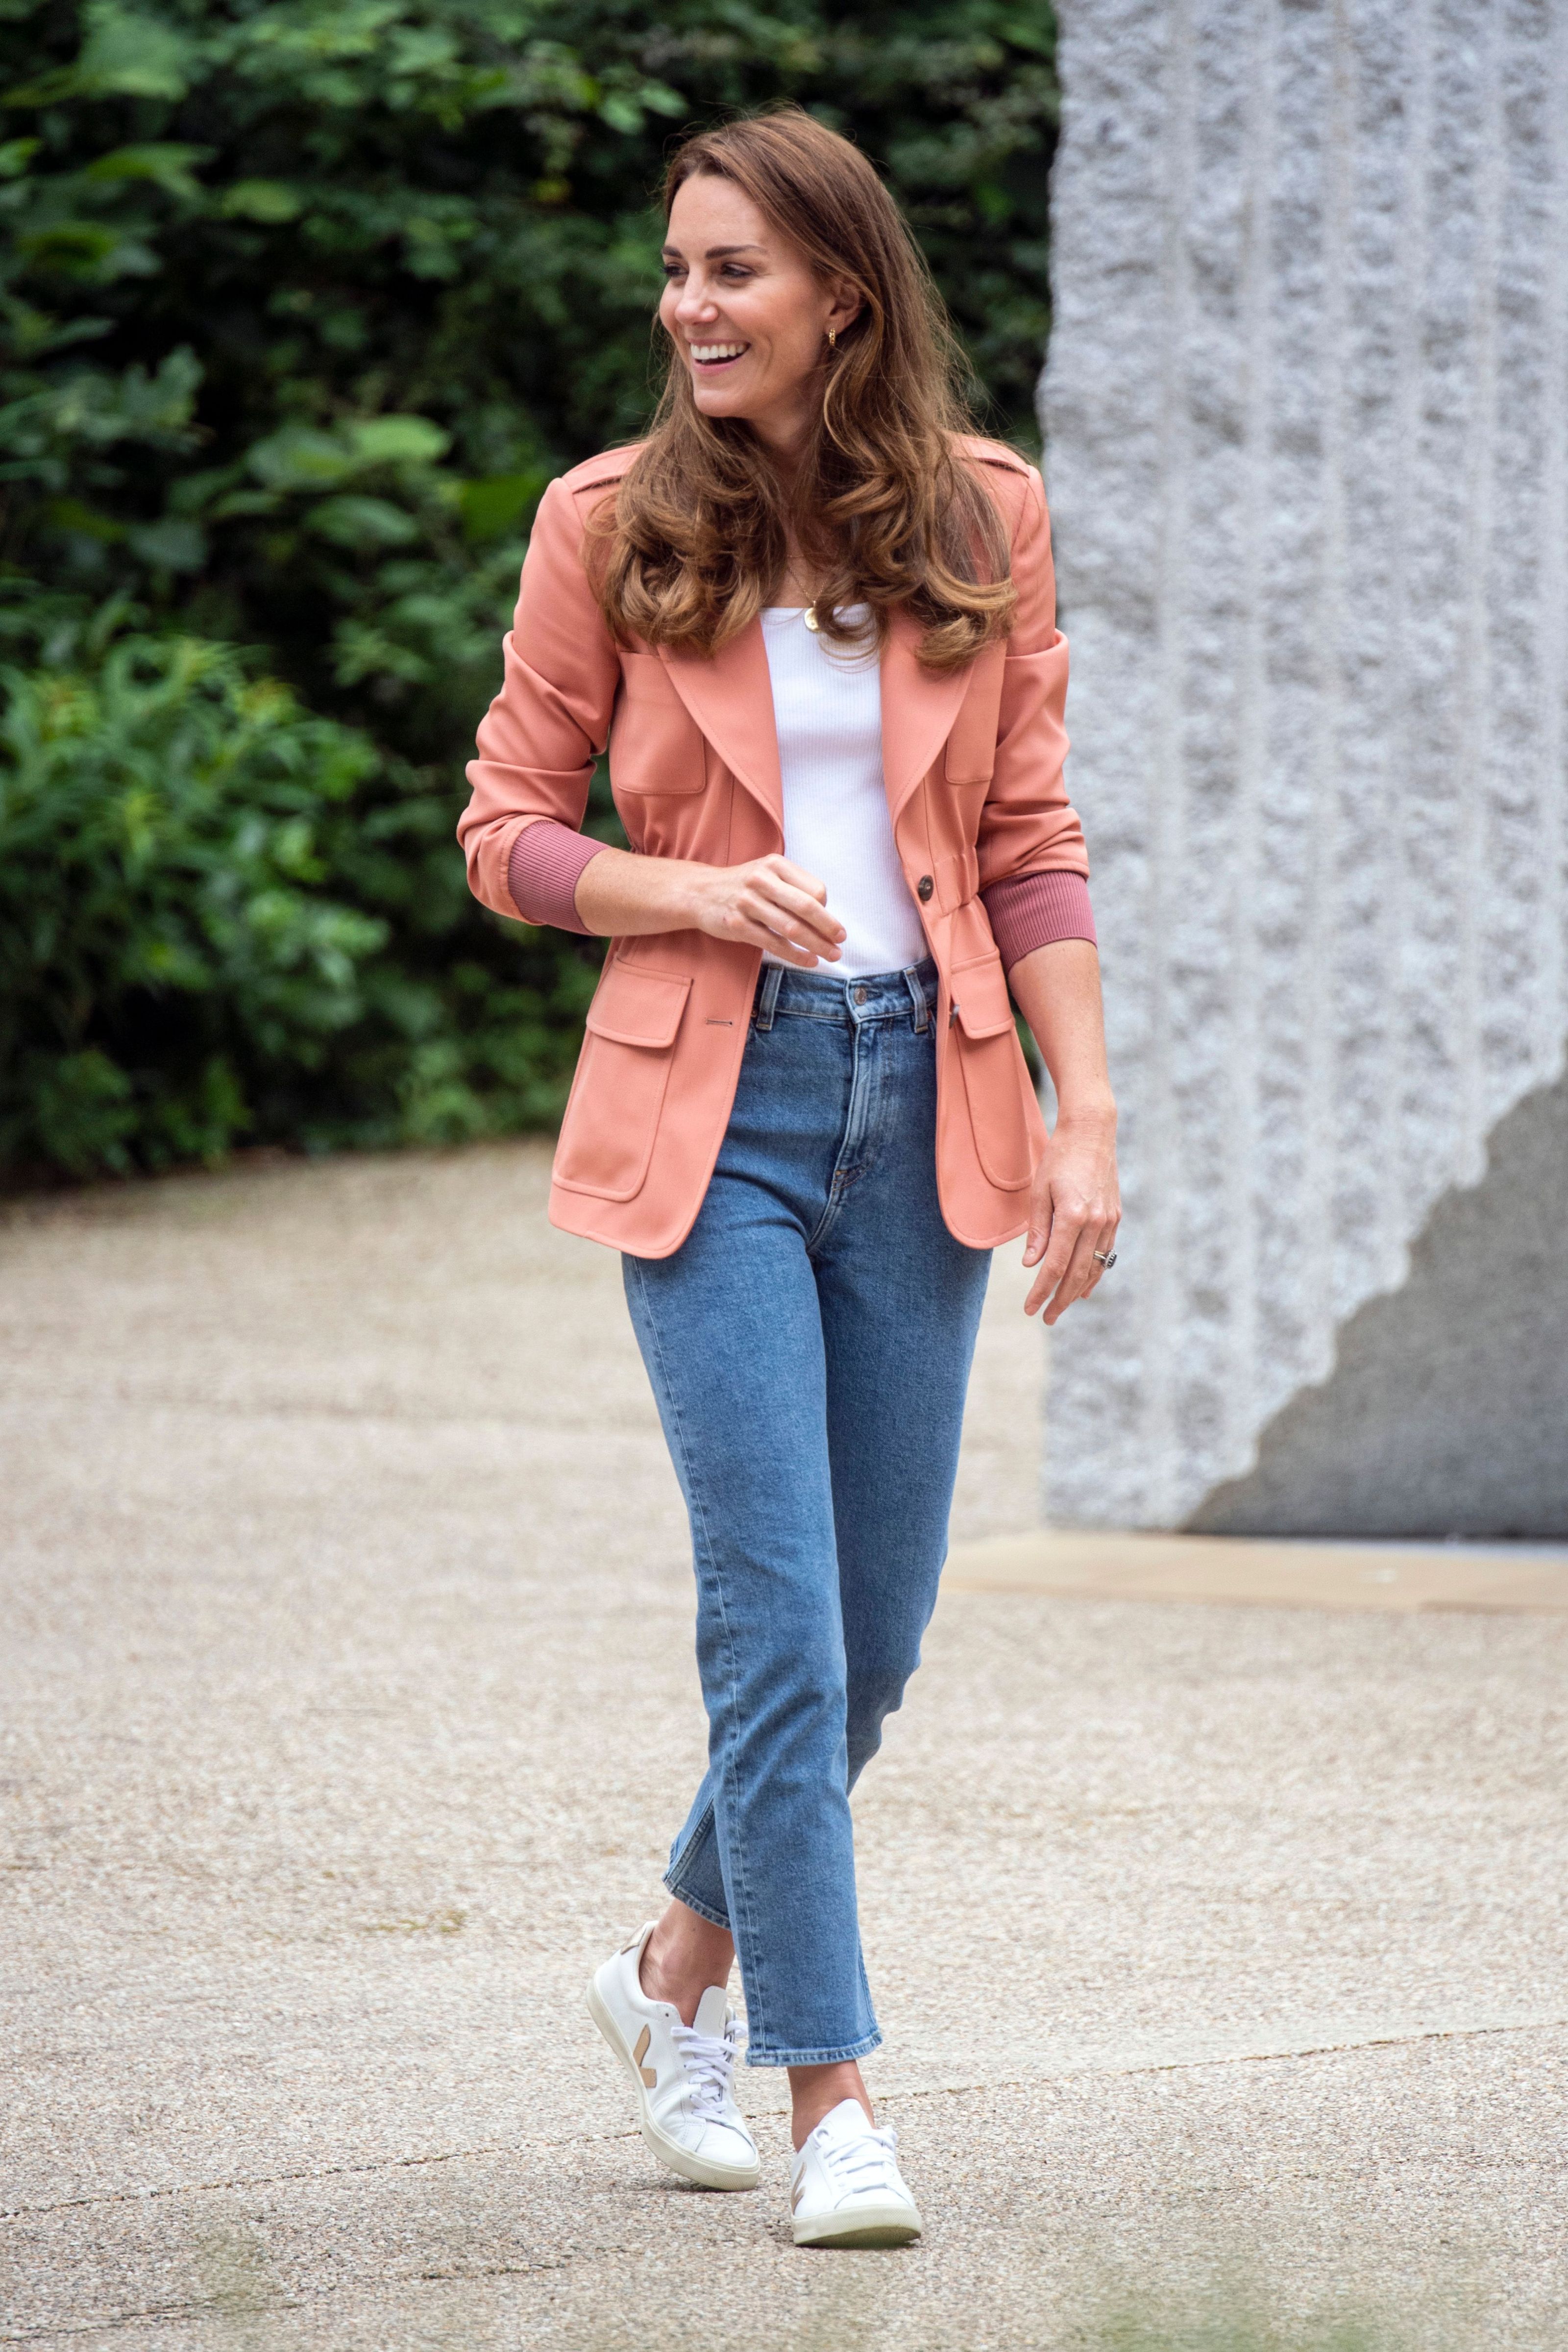 Duchess Kate Middleton in Skinny Jeans: Photos of the Look